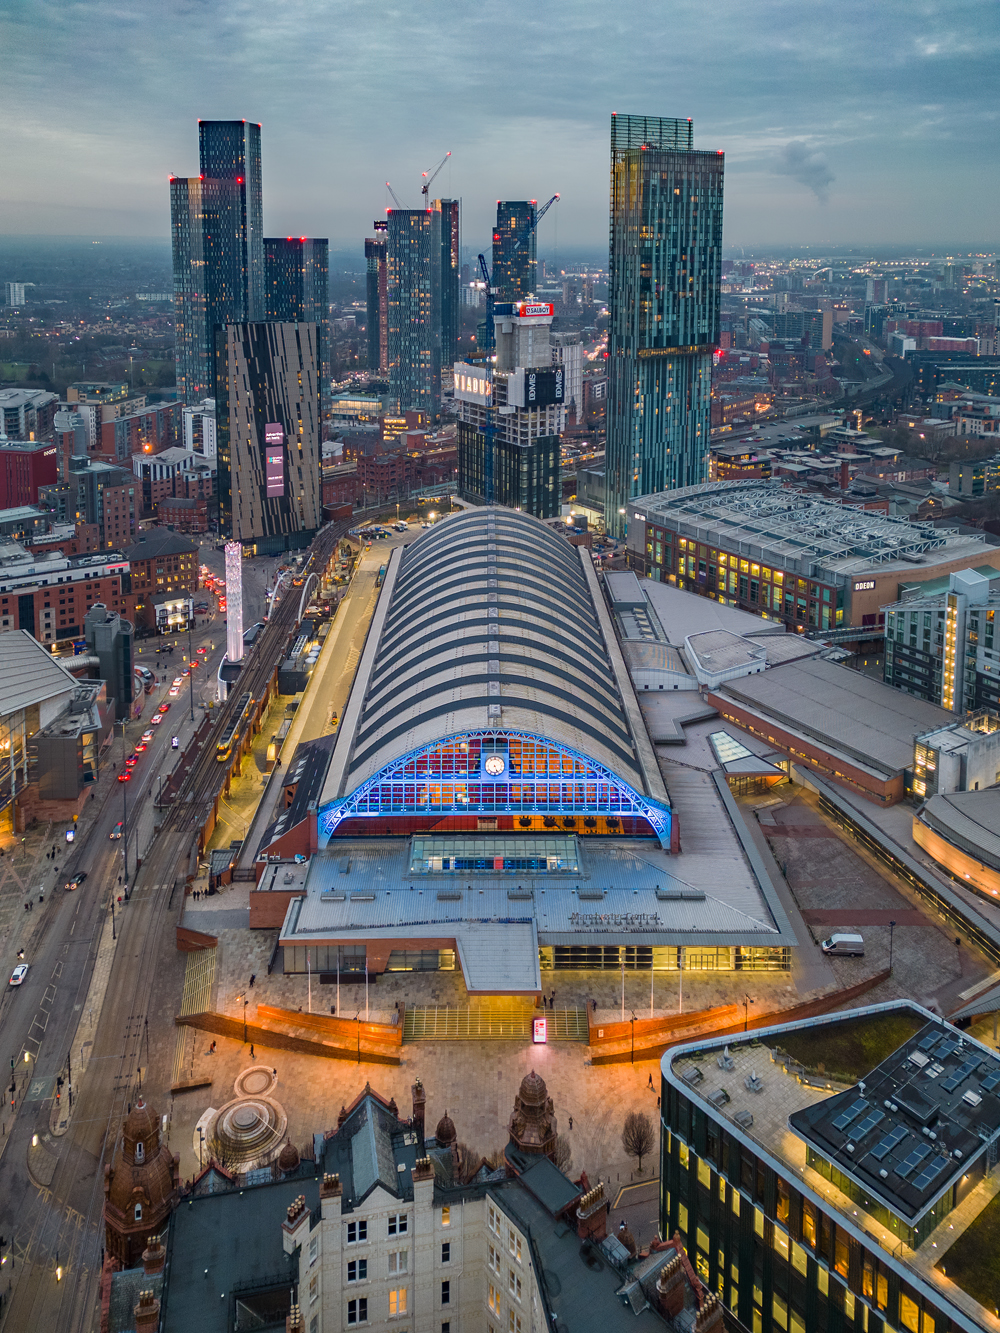 An daytime aerial drone shot showing a birds eye view of Manchester Central and the surrounding skyscrapers and city.